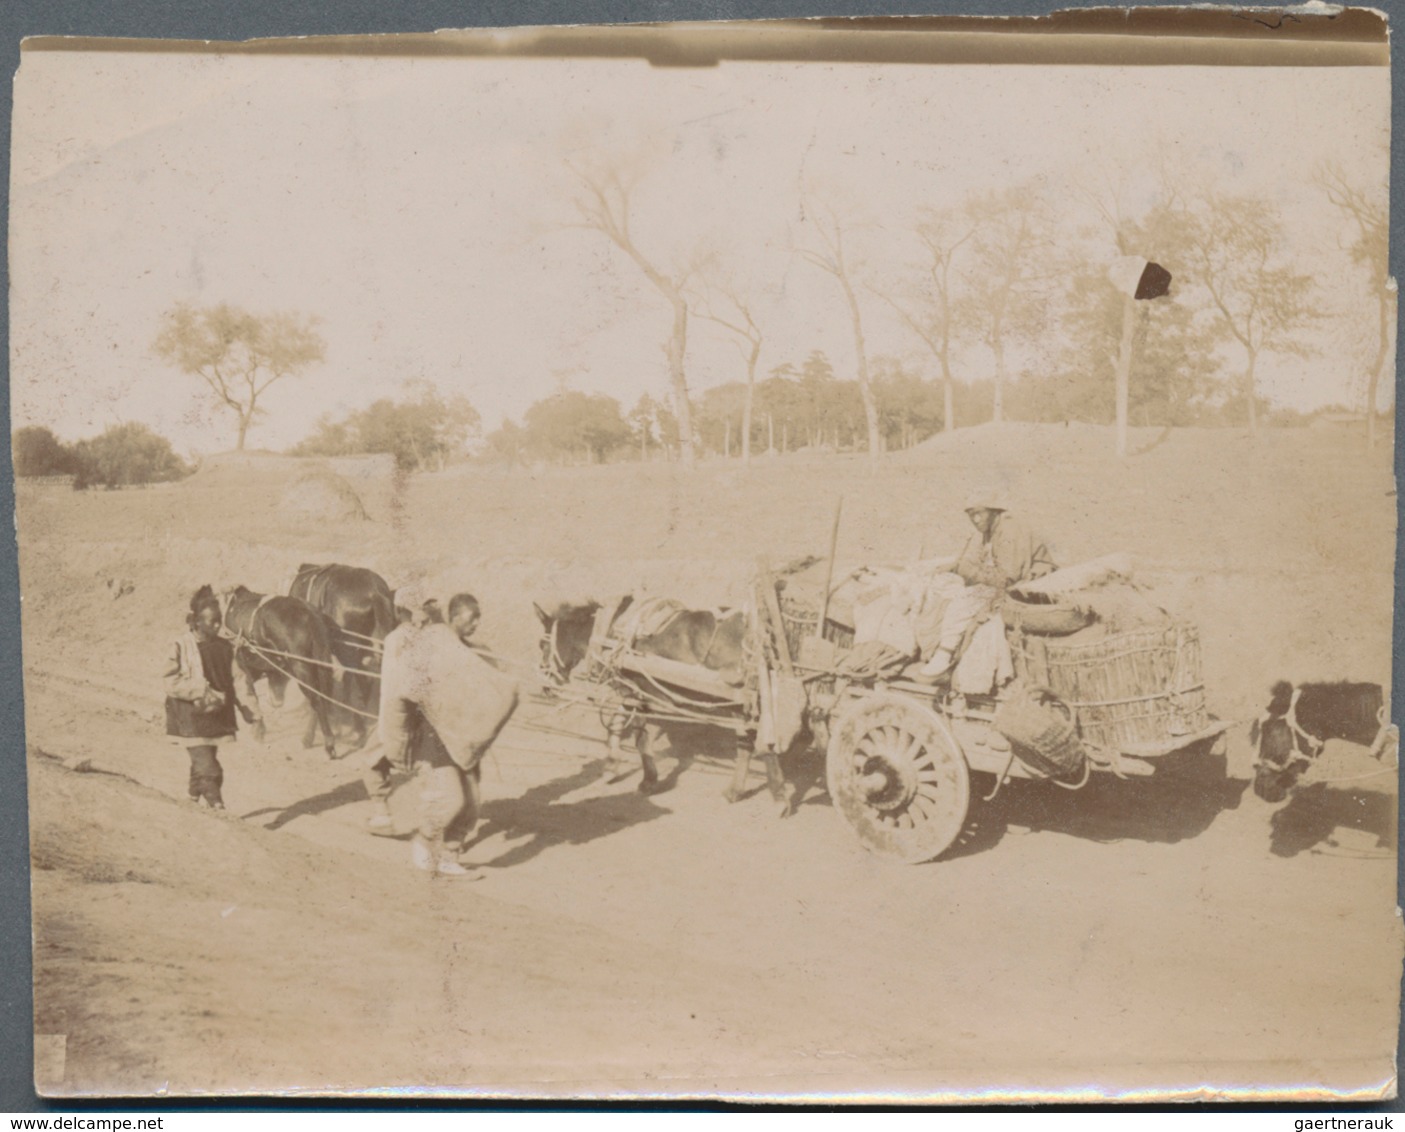 China: 1905/14 (ca.), 21 privately taken photographs of Nanking and surroundings inc. Ming burials o